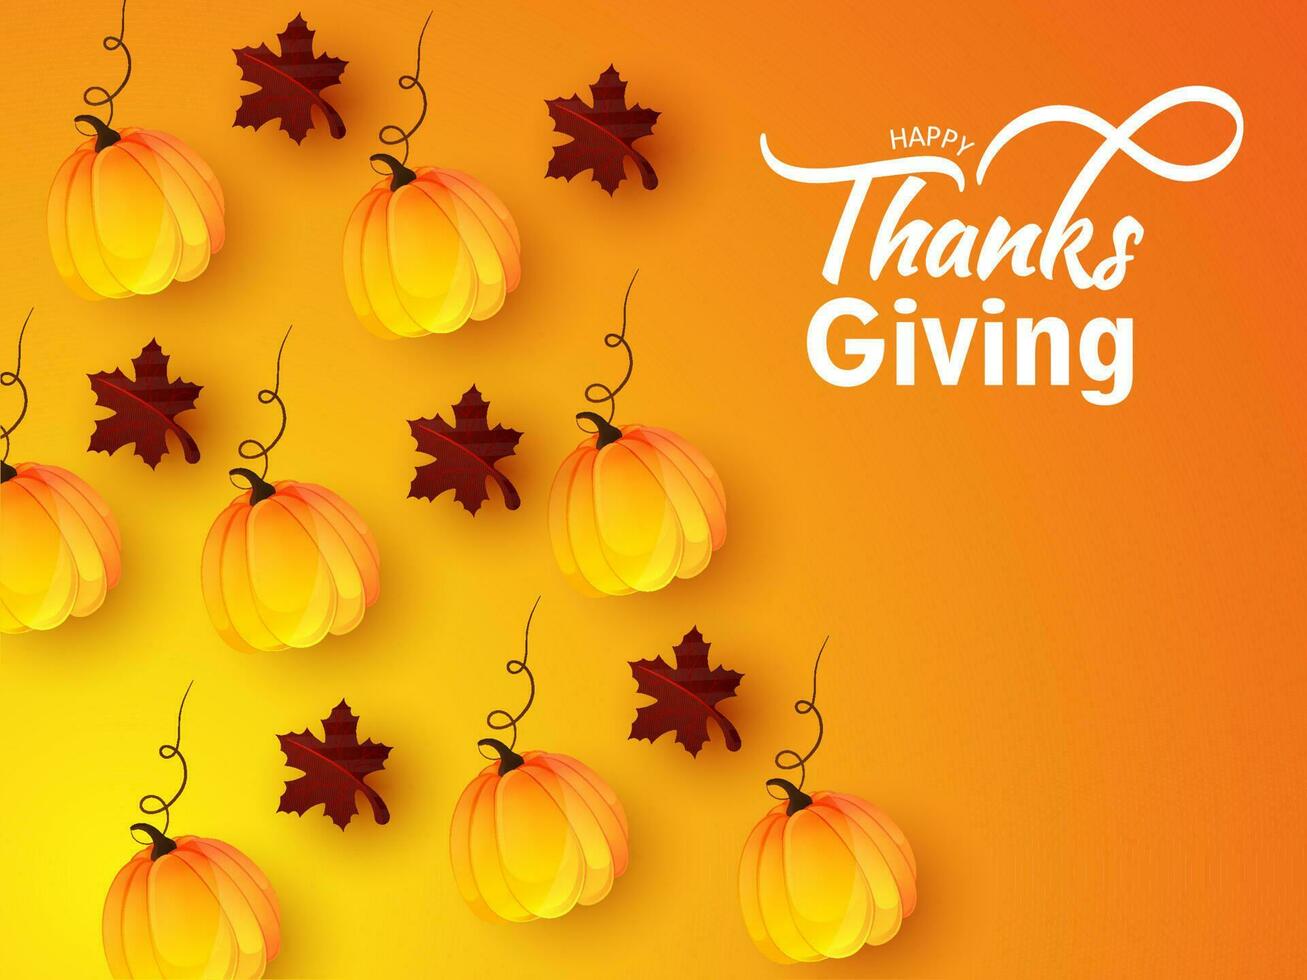 Happy Thanksgiving celebration poster design decorated with pumpkins and maple leaves on orange and yellow background. vector